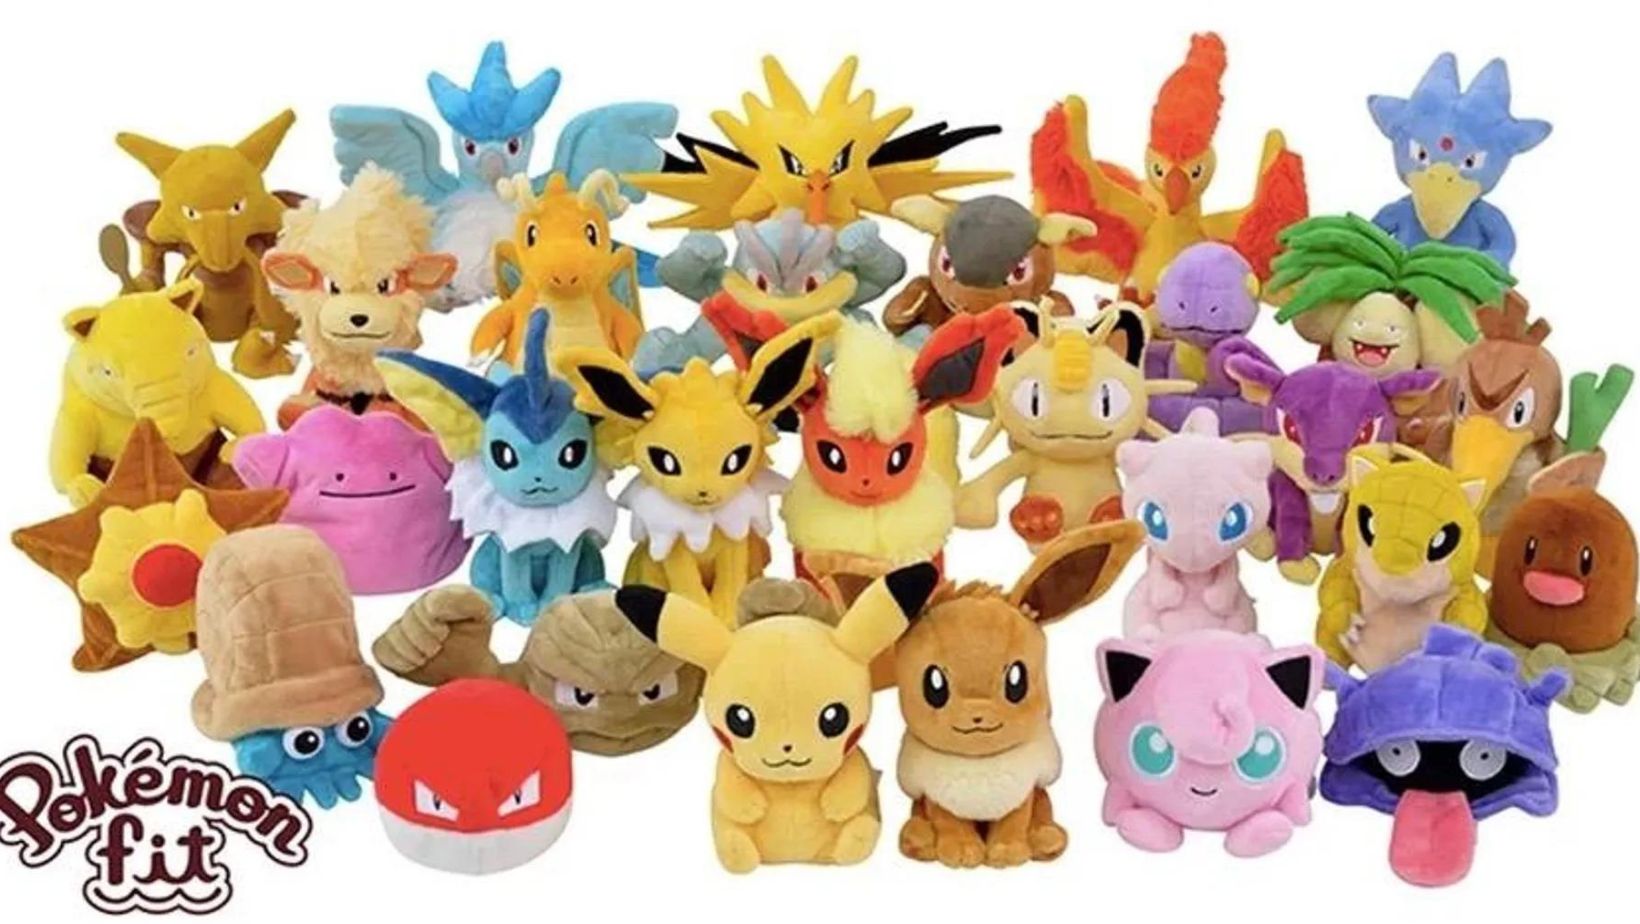 Types and Brands of Pokemon Plush Collectibles